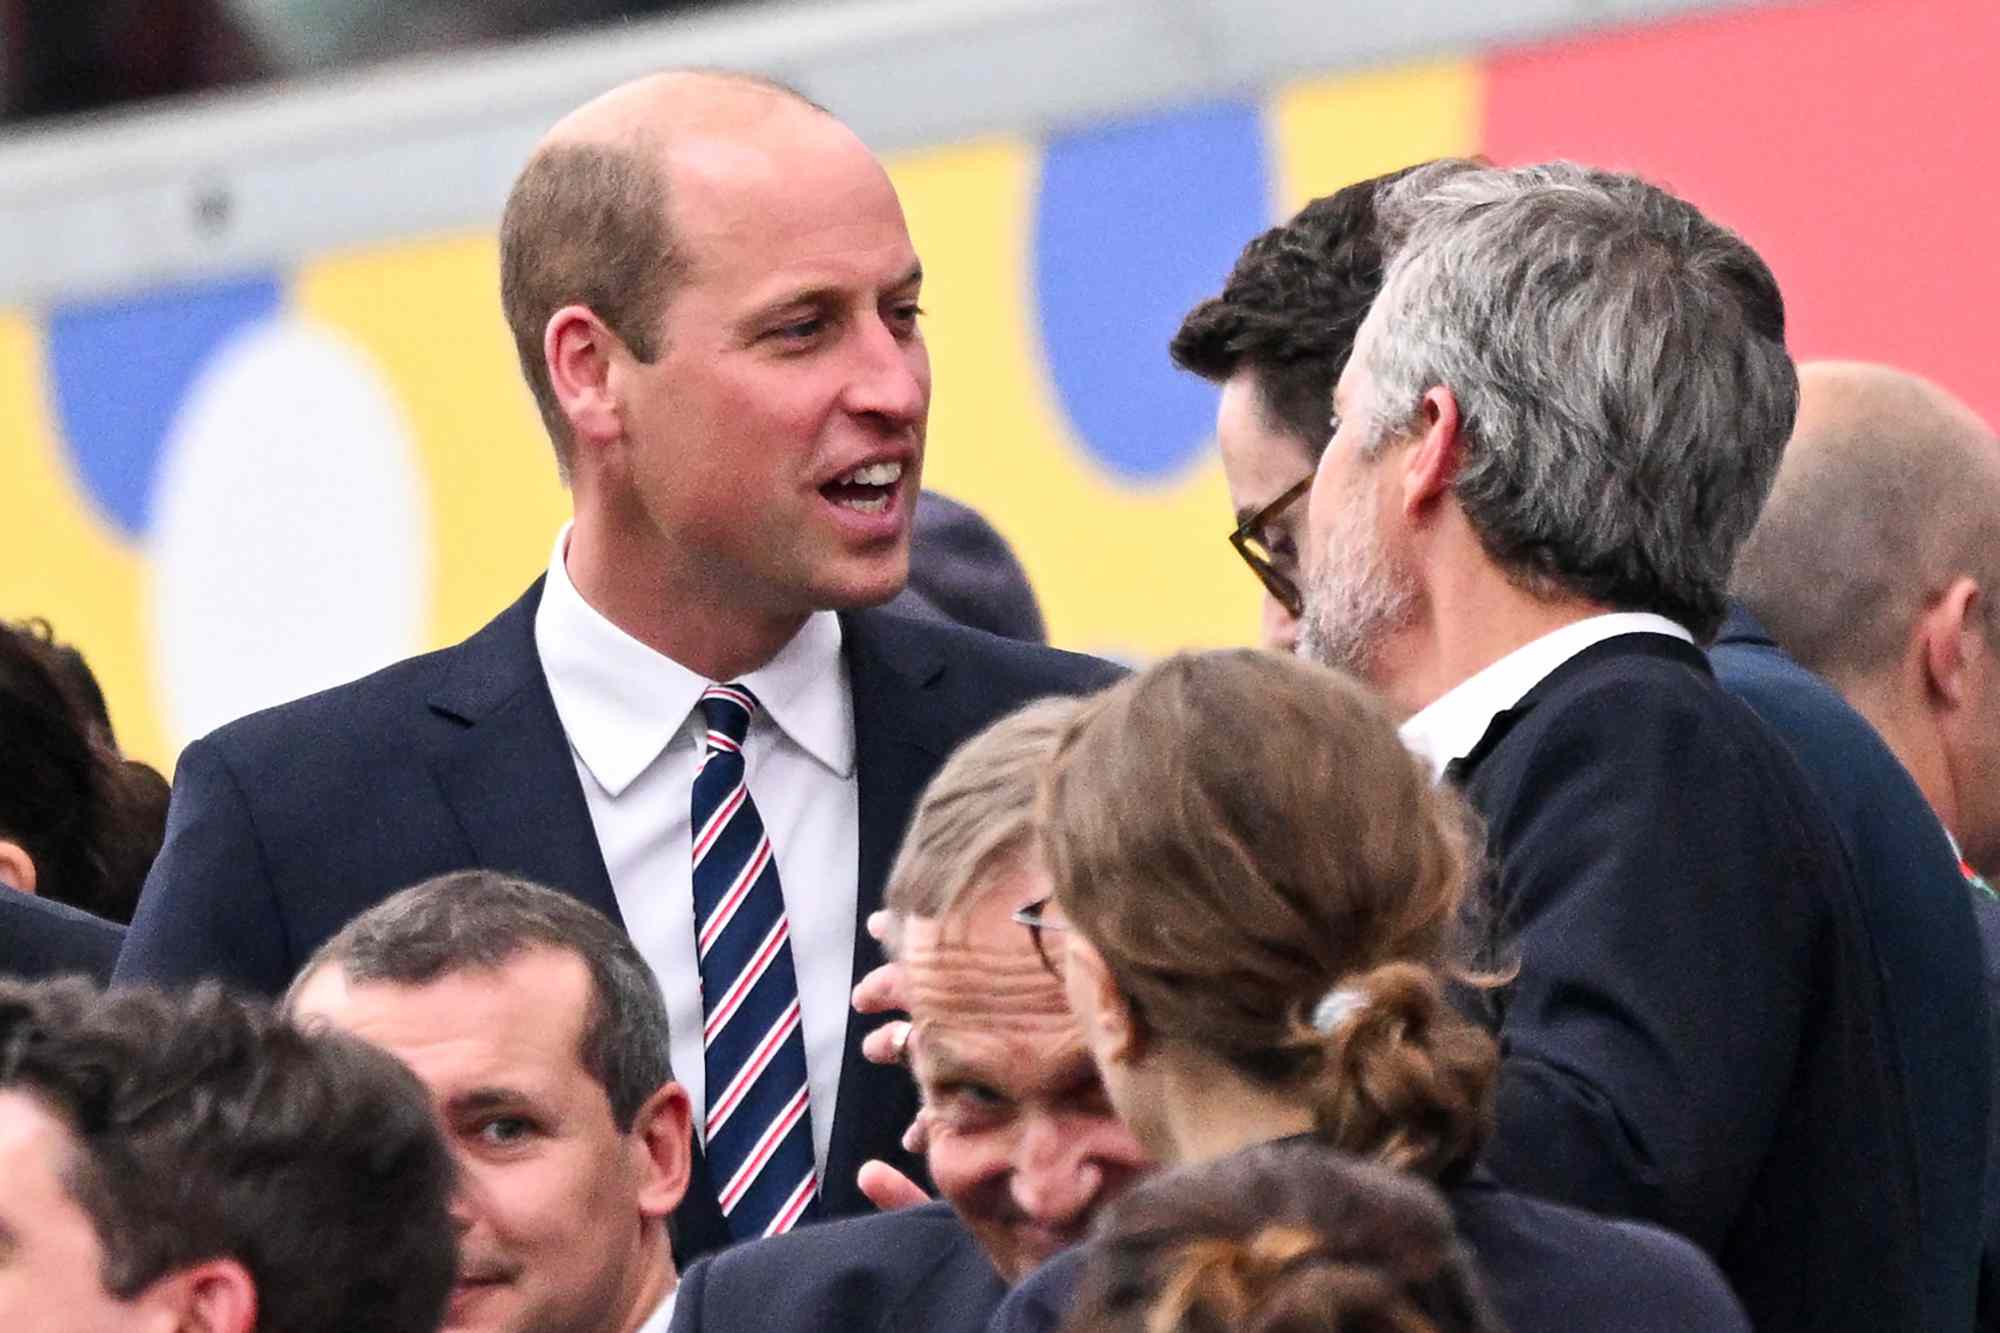 Prince William Poses with King Frederik of Denmark as the Countries Face Off in Soccer: 'May the Best Team Win'